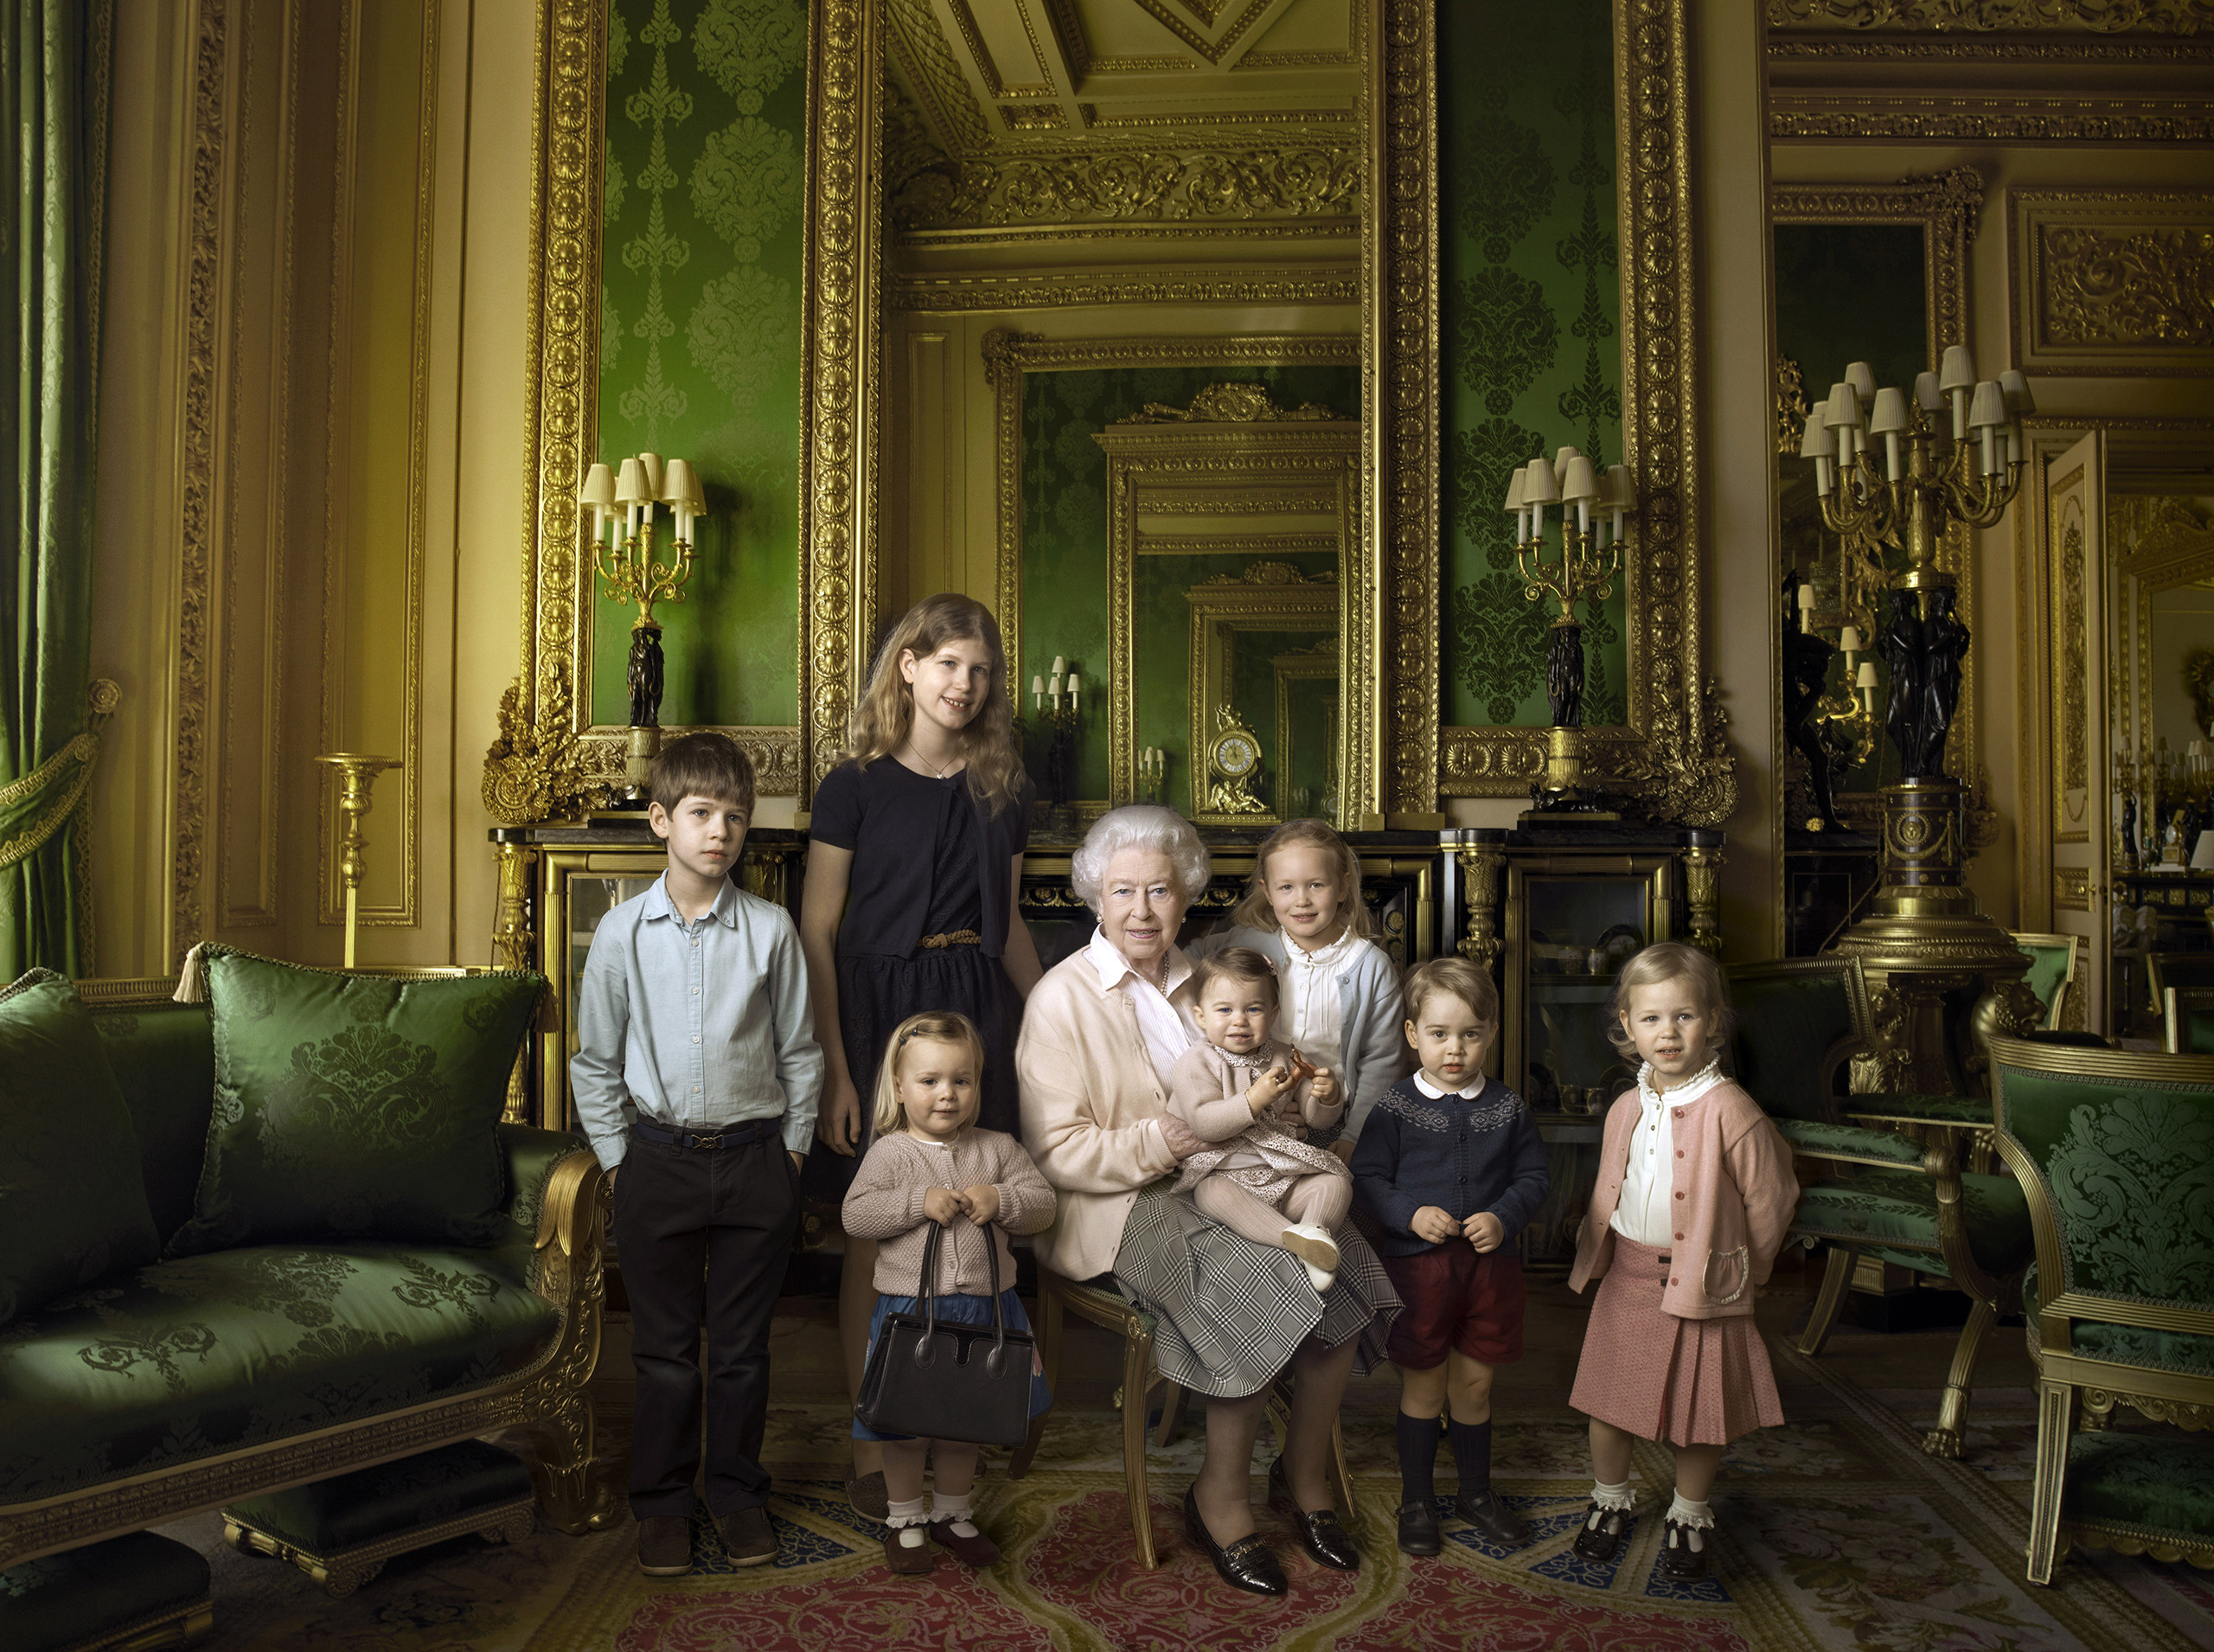 This official photograph released by Buckingham Palace to mark Queen Elizabeth II's 90th birthday shows her five great-grandchildren and her two youngest grandchildren in the Green Drawing Room, part of Windsor Castle's semi-State apartments, April 20, 2016. (REX/Shutterstock)